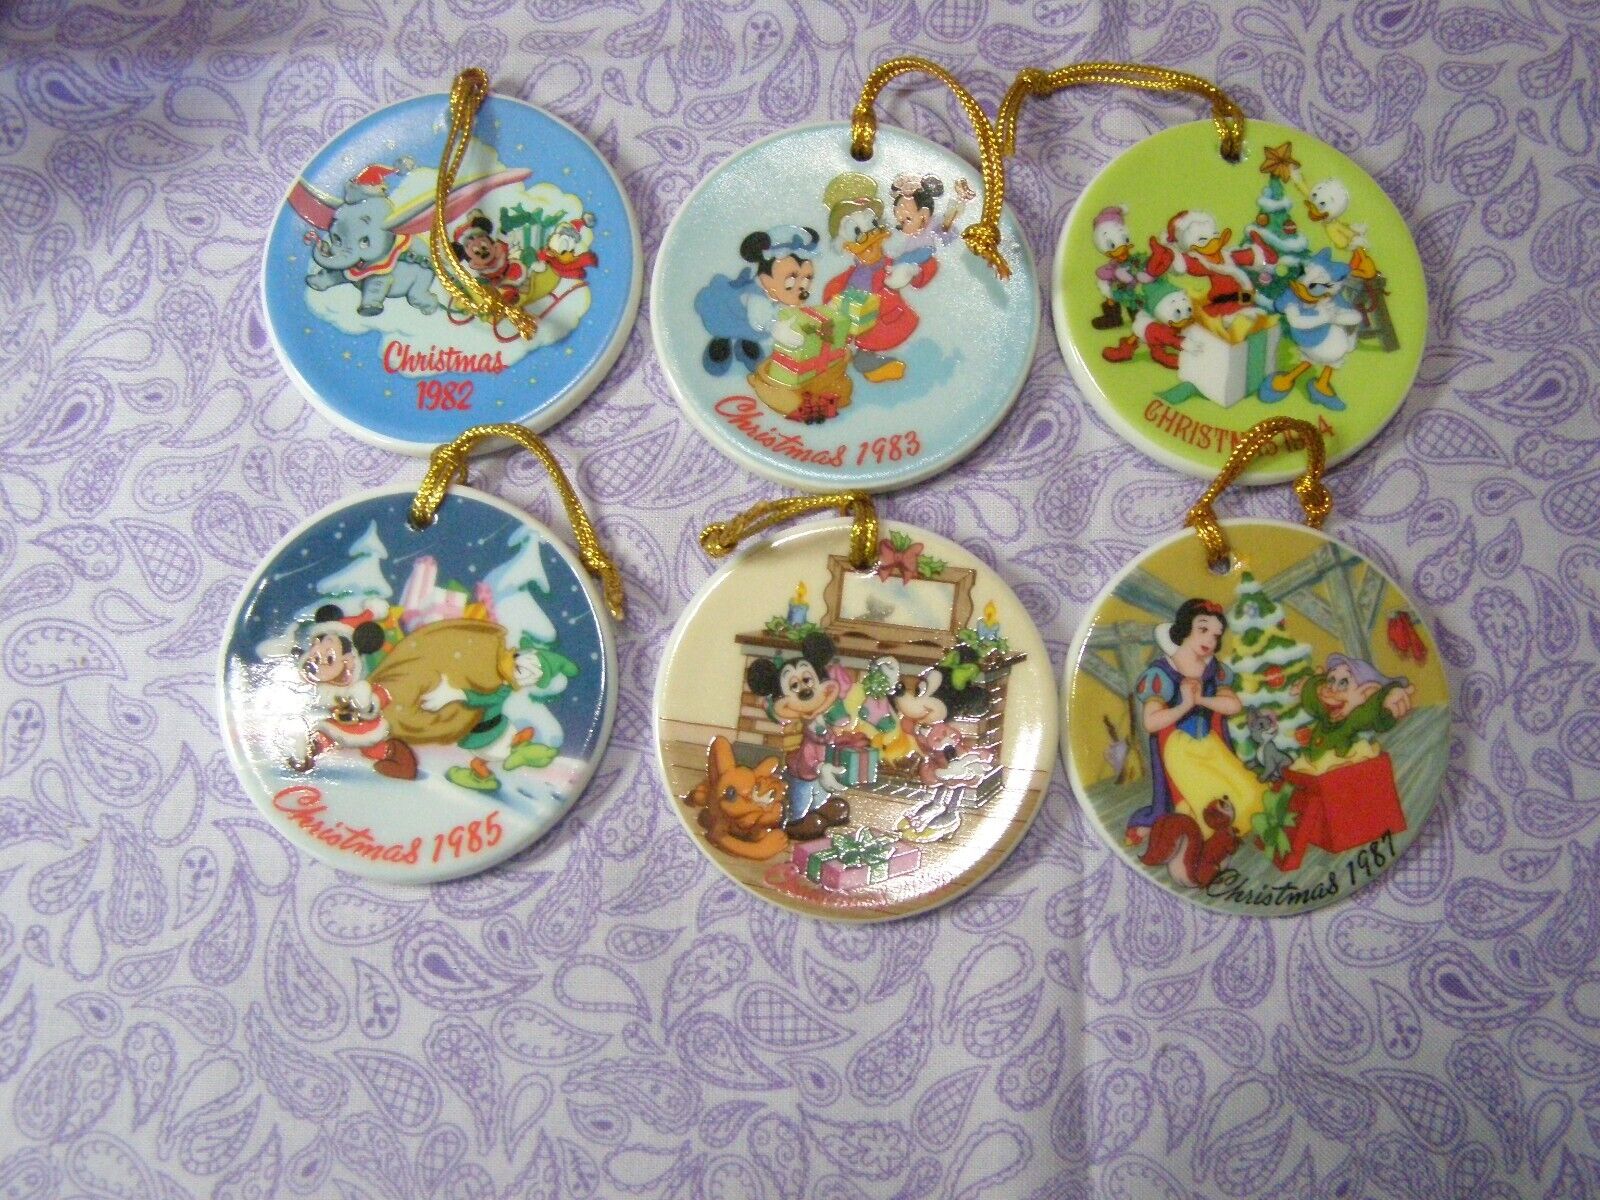 Vintage Disney Ceramic Ornaments - 6 Ornaments Dated 1982- 1987 Limited Editions